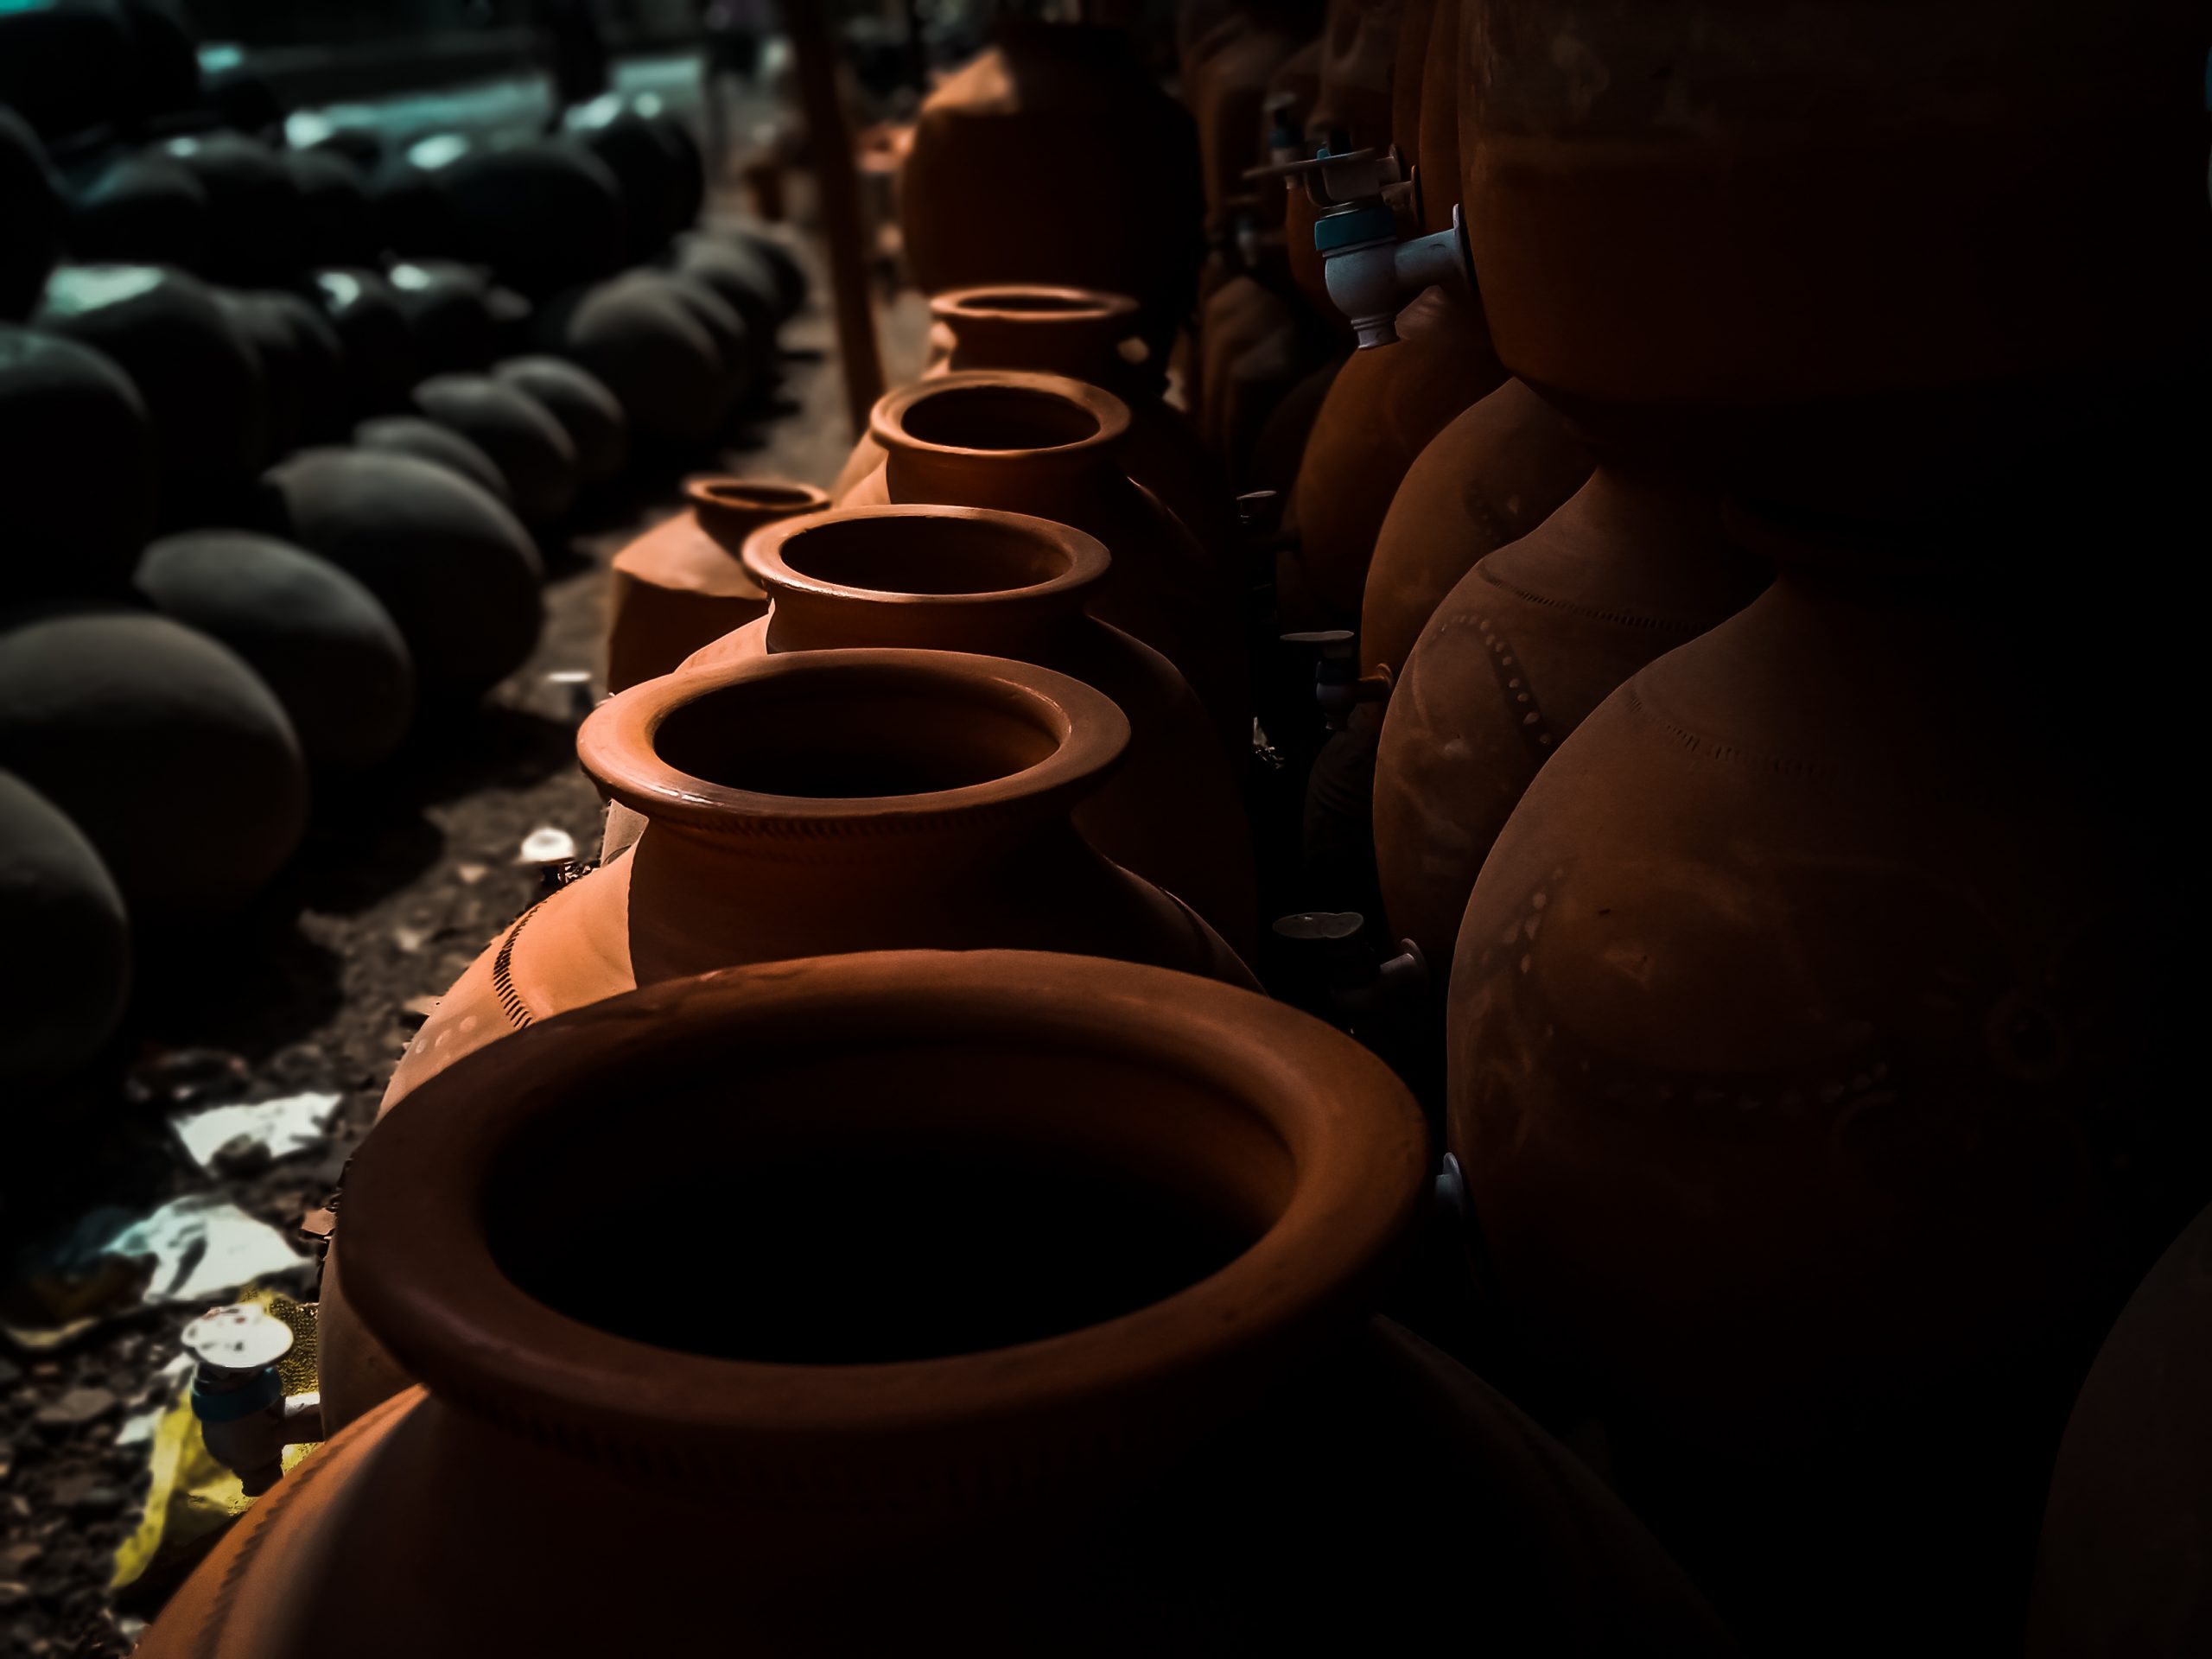 Clay pots in a store